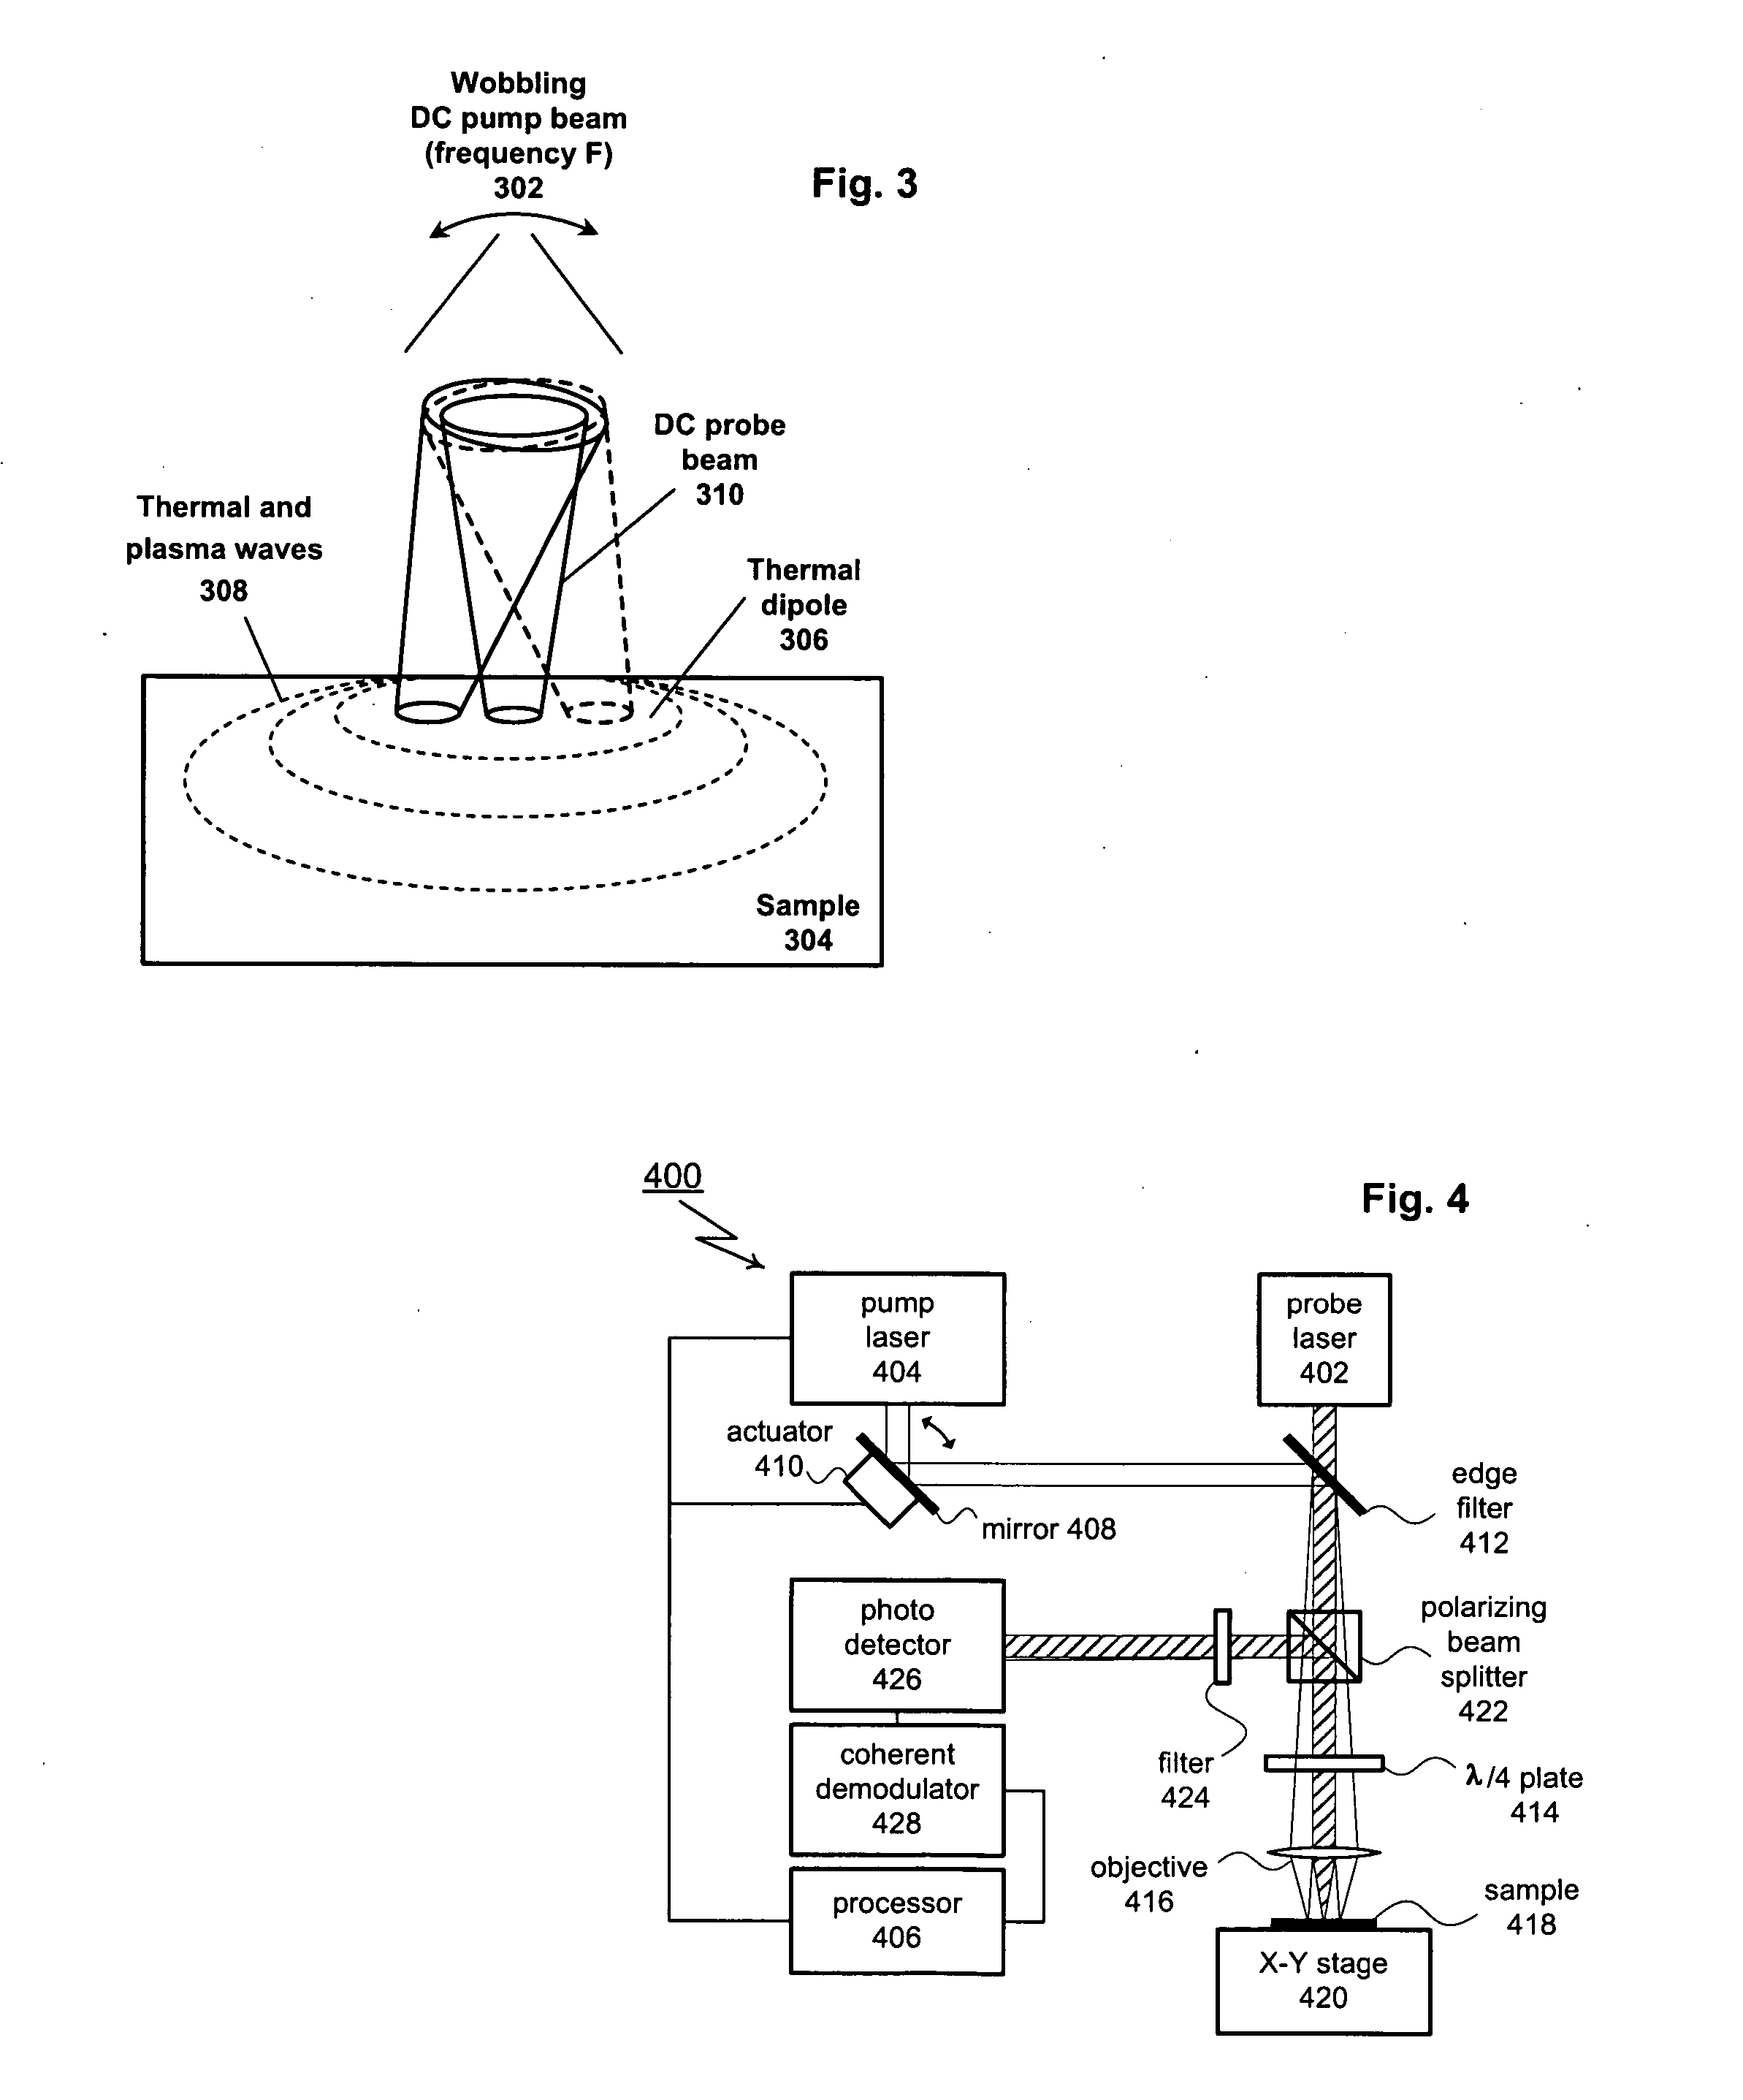 Position modulated optical reflectance measurement system for semiconductor metrology